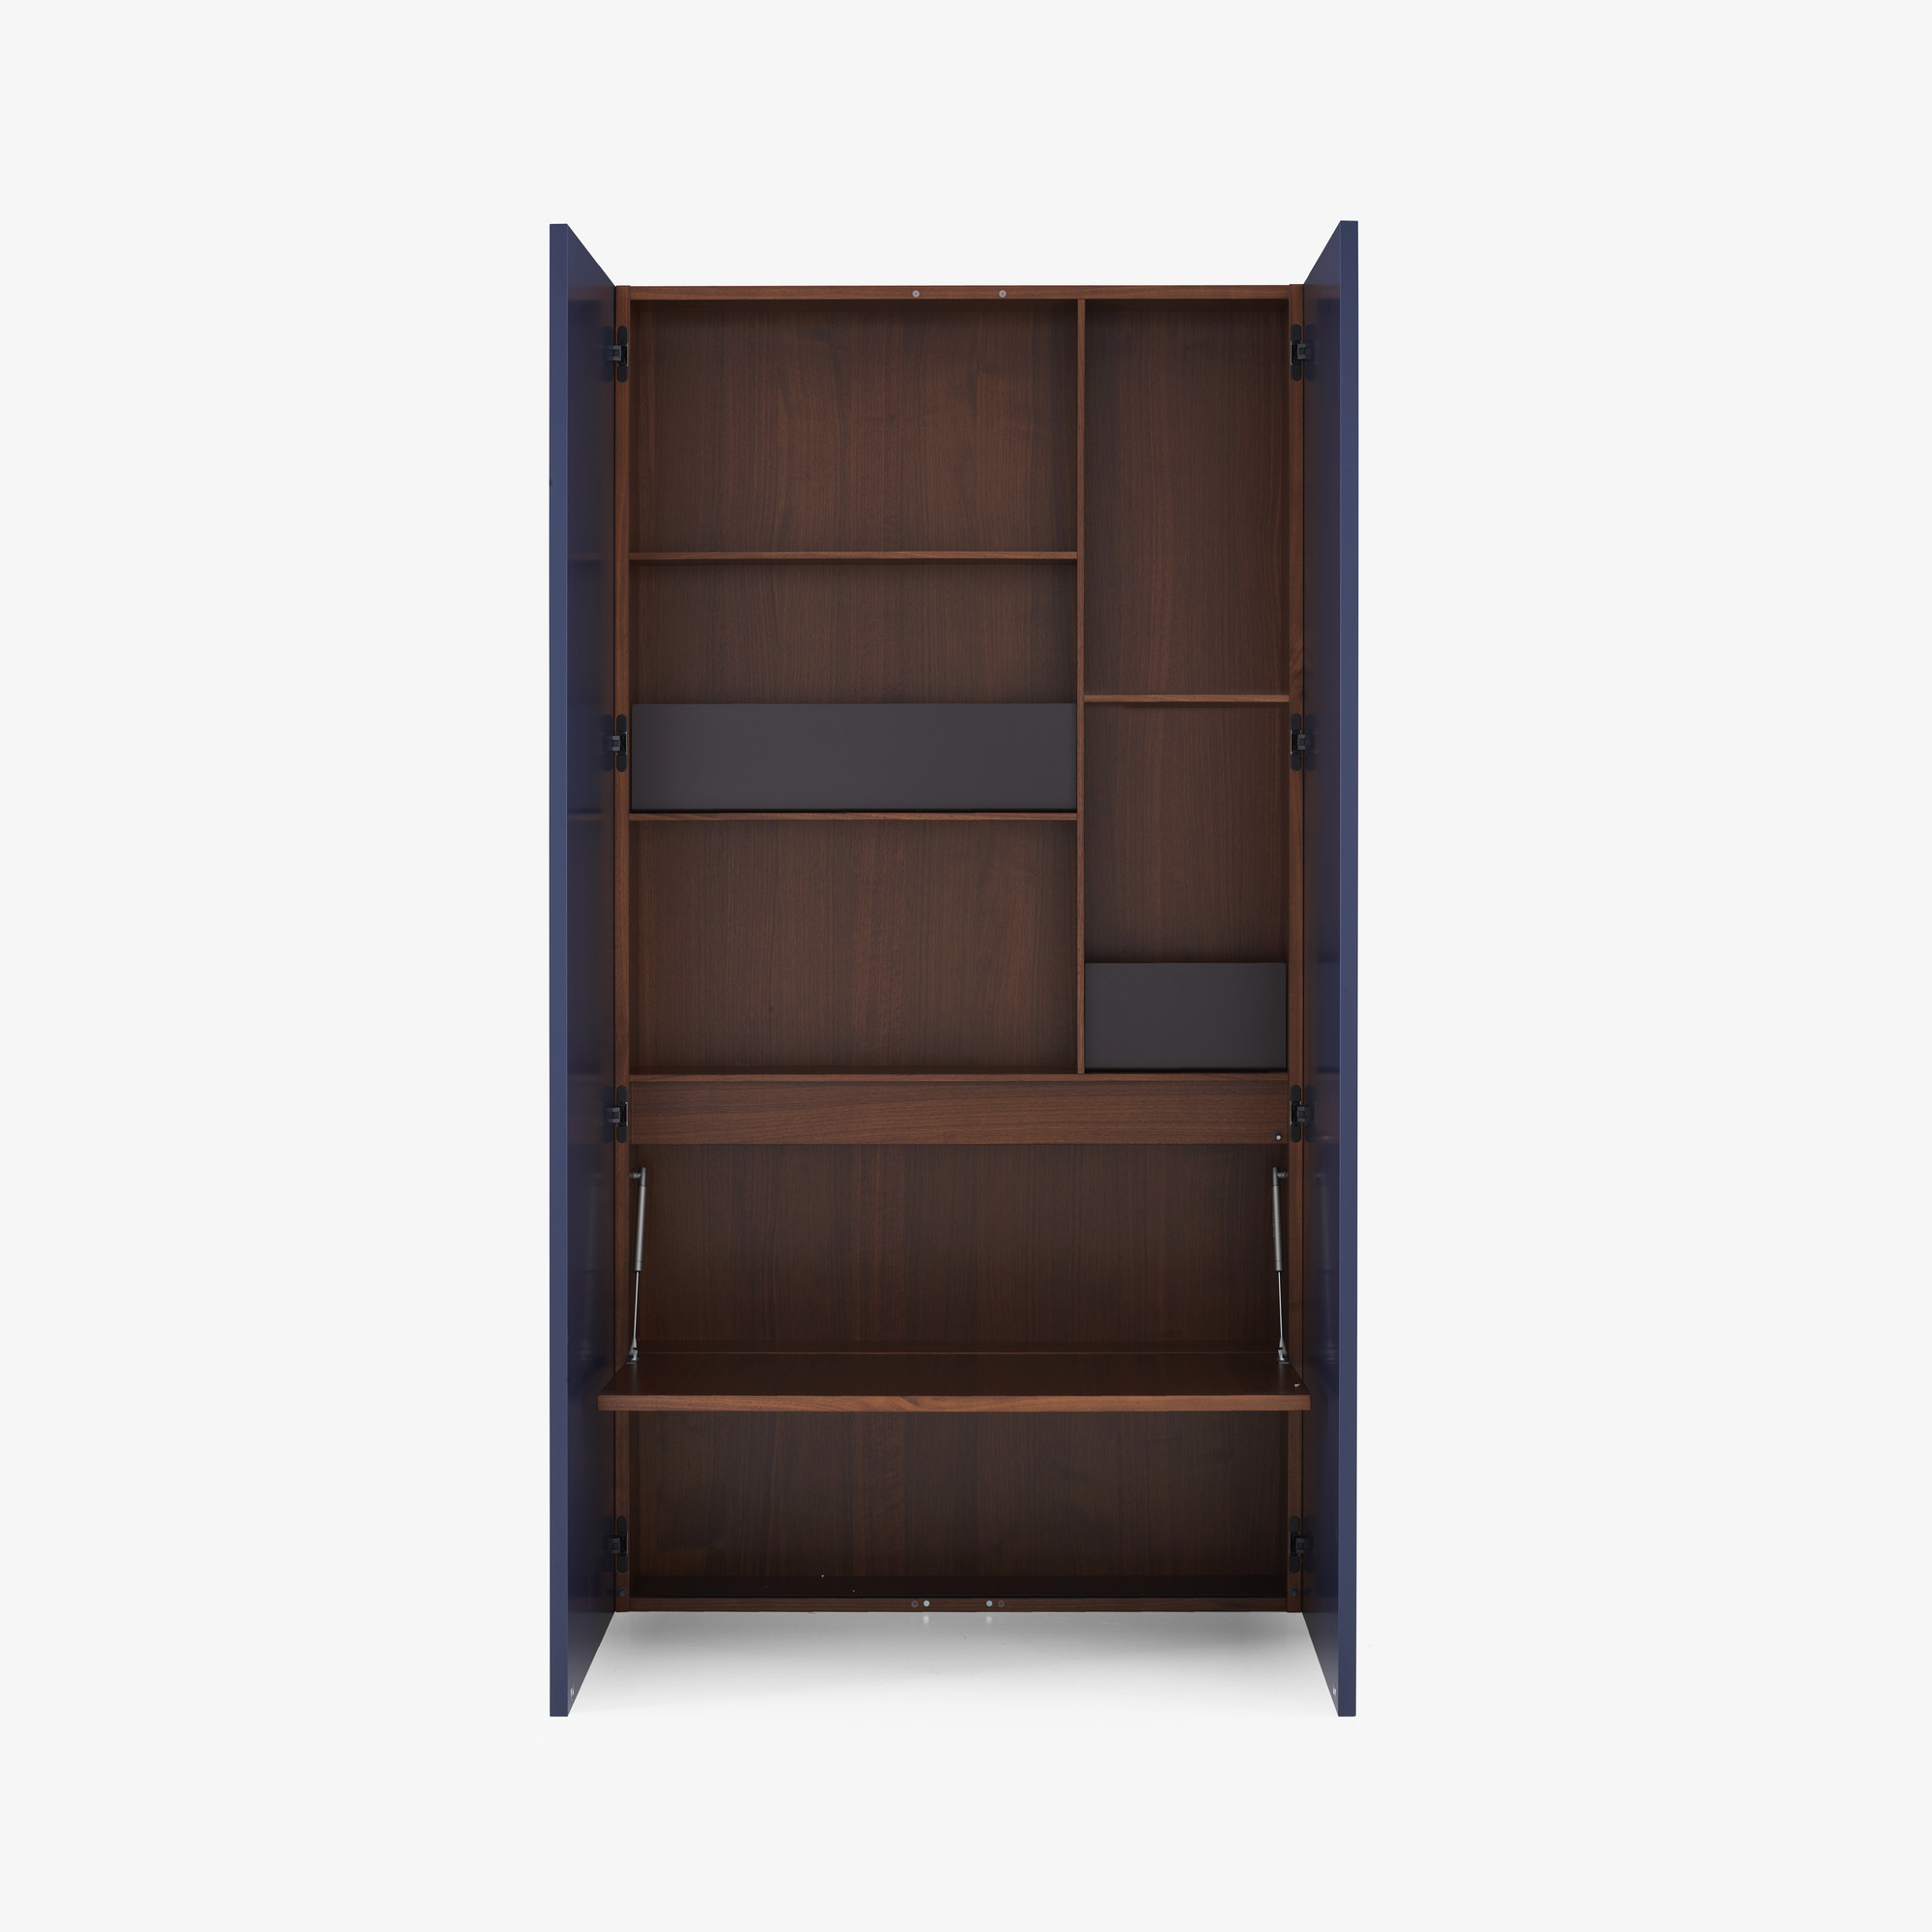 Image Wall-mounted secretaire 1